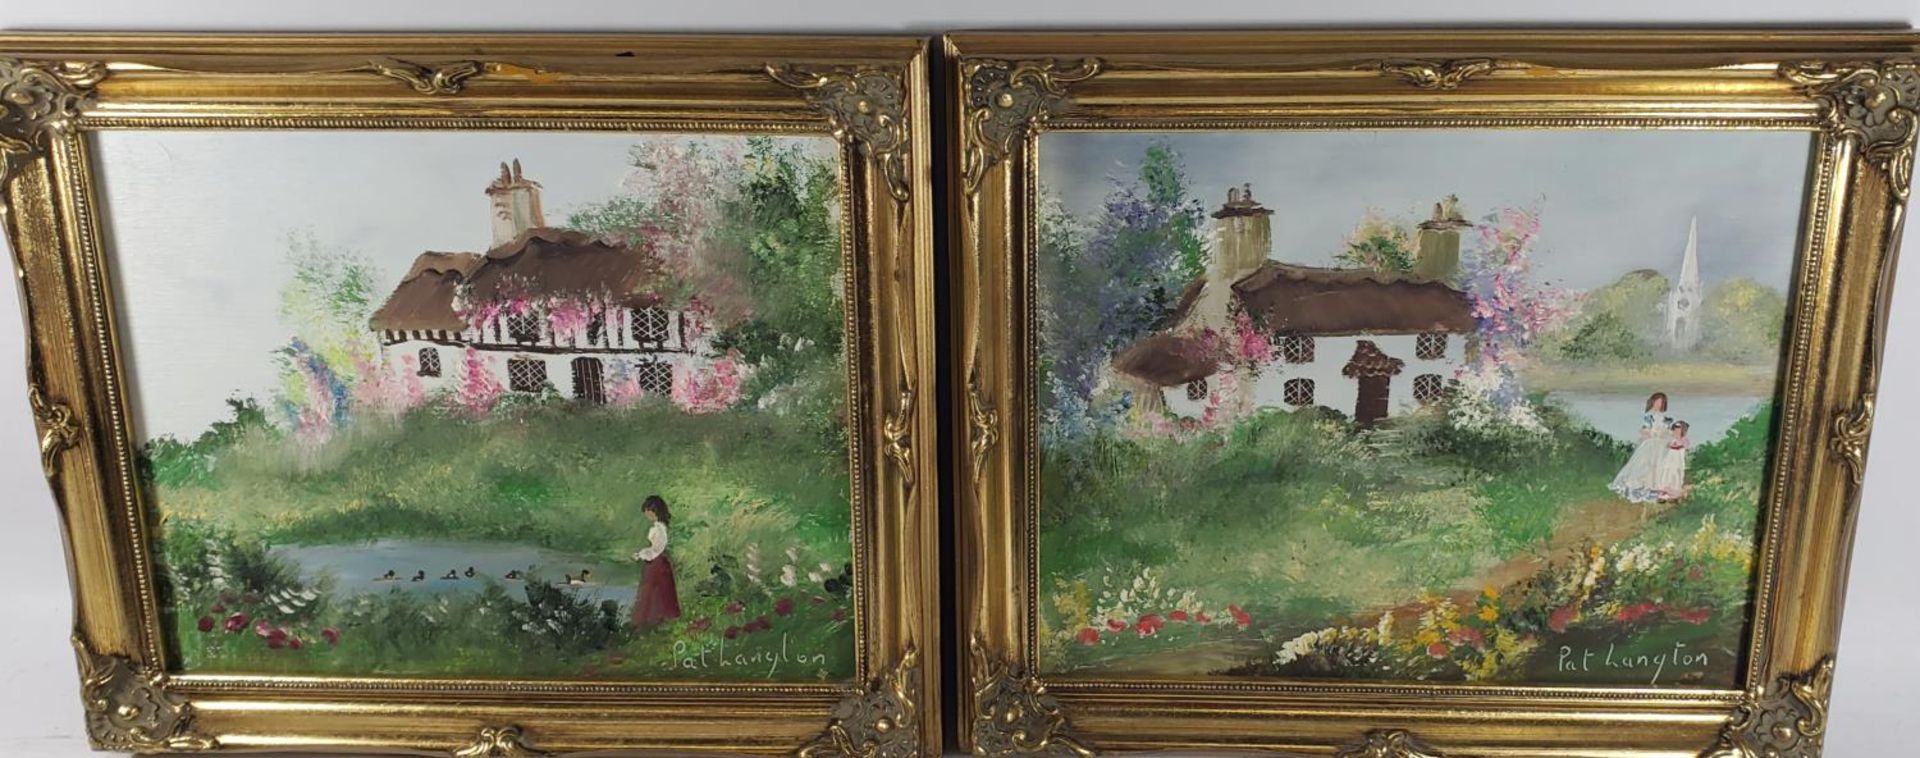 TWO PAT LANGTON SIGNED OILS ON BOARD OF COTTAGE SCENES, ONE WITH A BRIDE AND BRIDESMAID, THE OTHER A